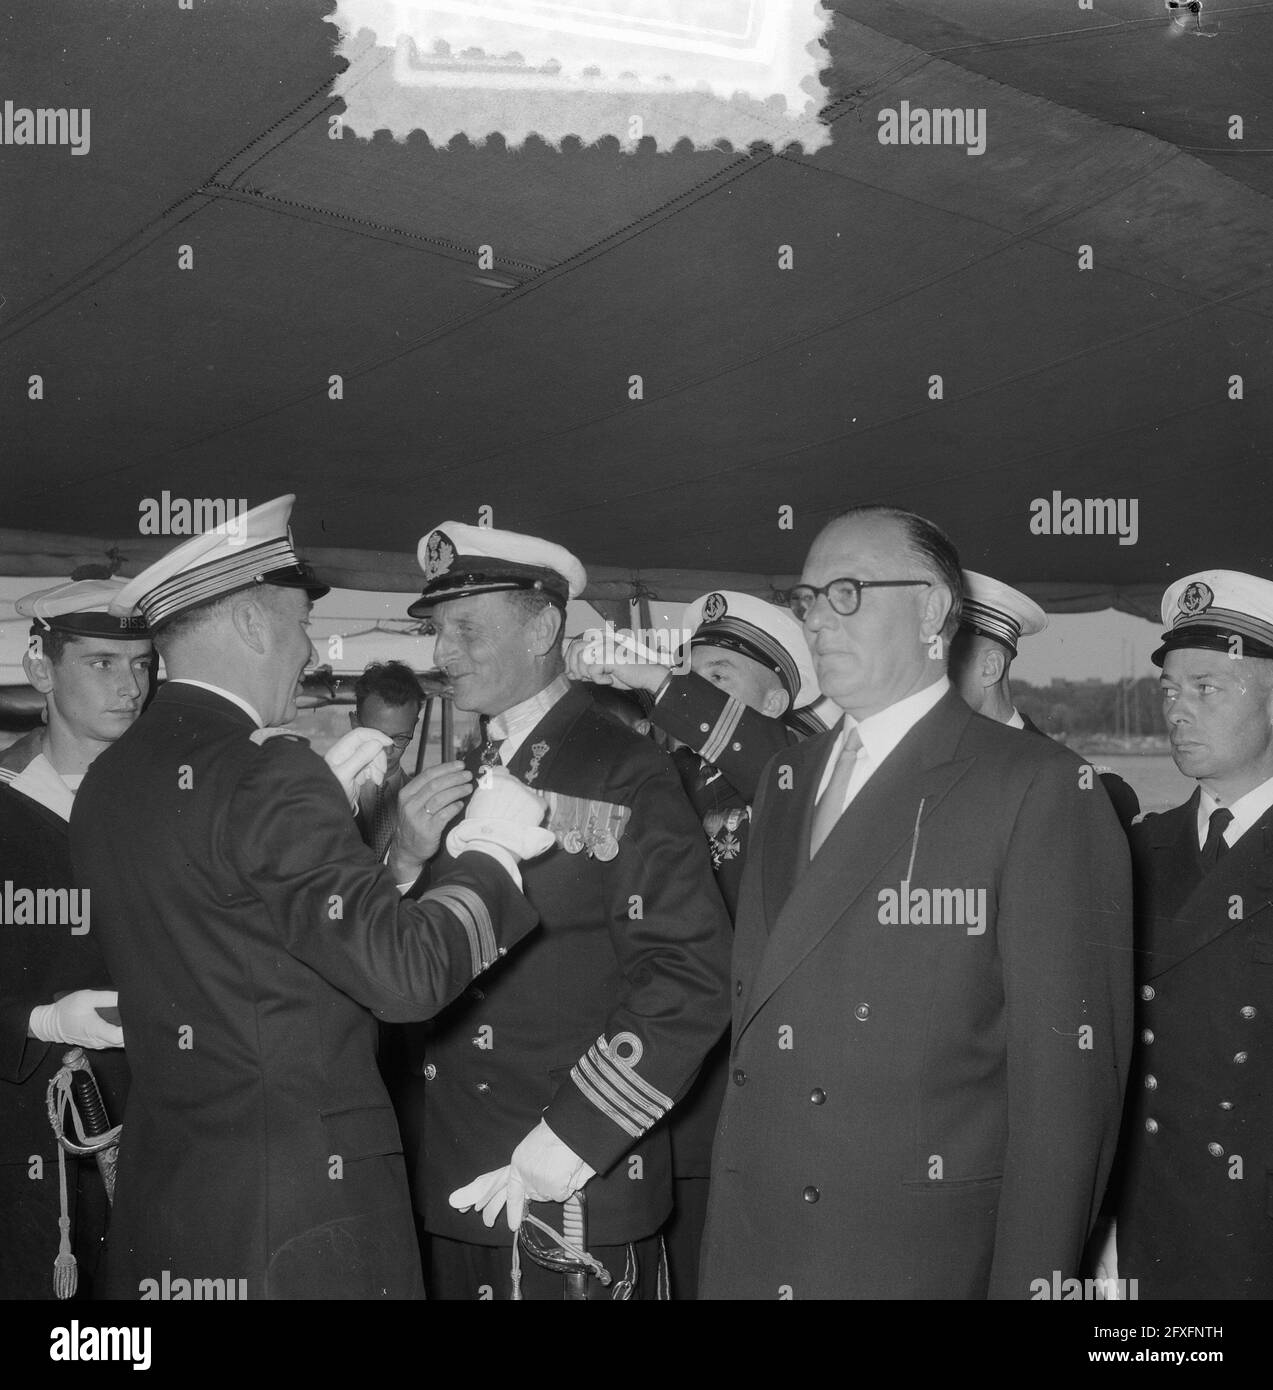 Awarding of decorations on board French warship Brisson Captain at sea J. S. Bax and Lieutenant at sea W. van der Tol, August 14, 1953, Awards, The Netherlands, 20th century press agency photo, news to remember, documentary, historic photography 1945-1990, visual stories, human history of the Twentieth Century, capturing moments in time Stock Photo